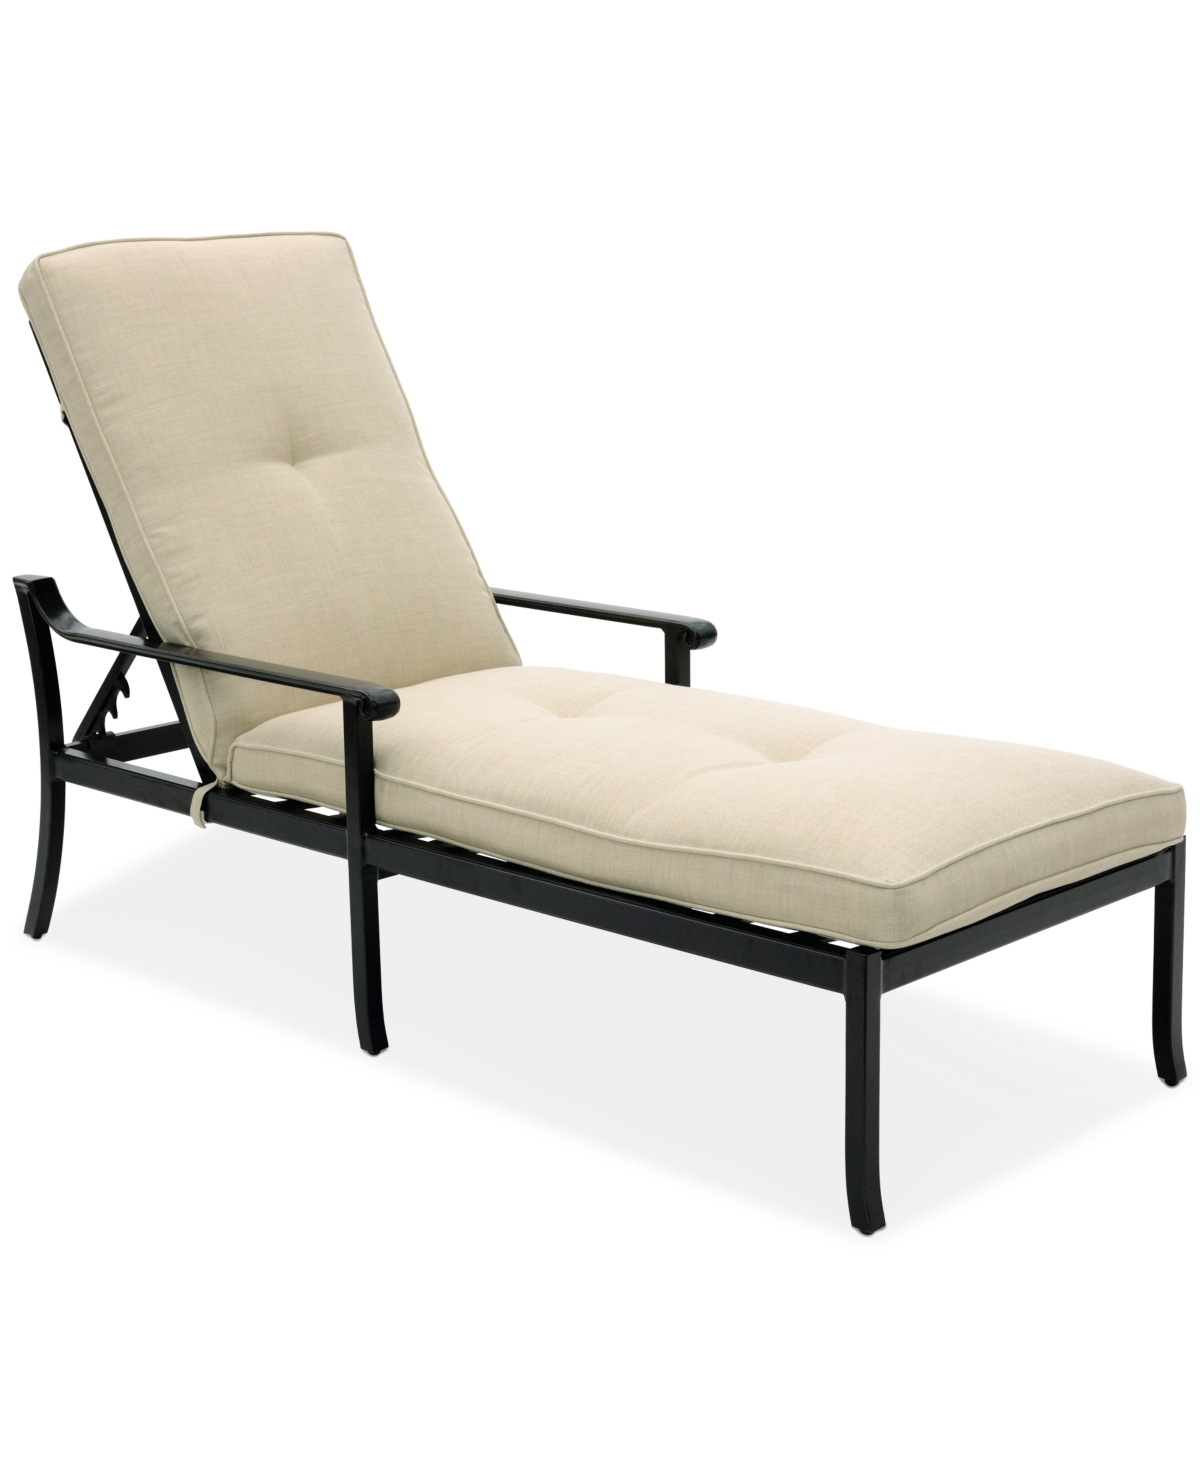 Agio Wythburn Mix And Match Scroll Outdoor Chaise Lounge In Straw Natural,pewter Finish